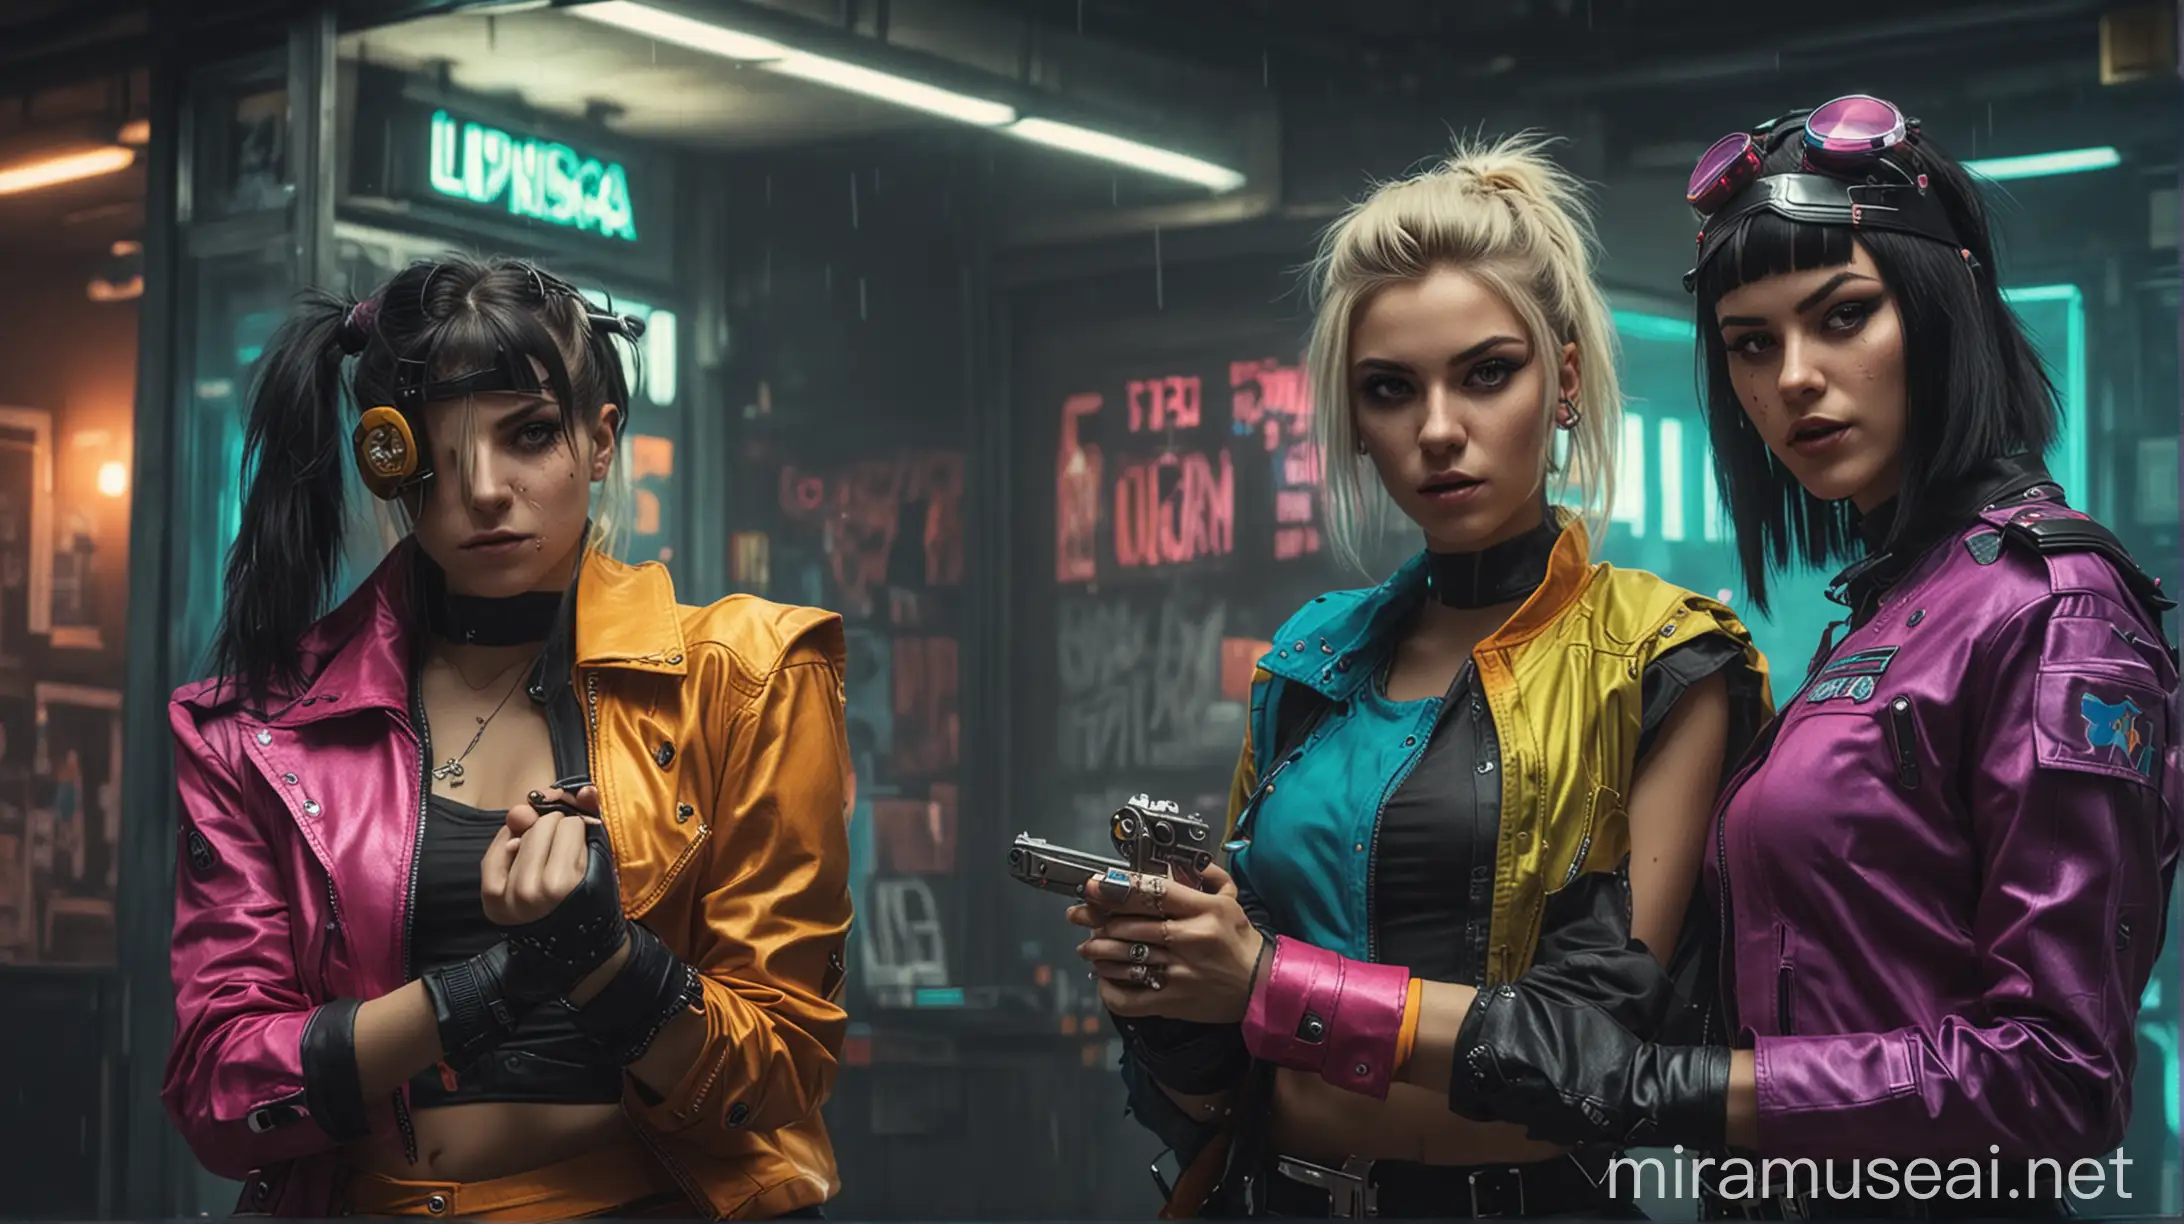 Three Young Women in Colorful Cyberpunk Uniforms Robbing a Bank